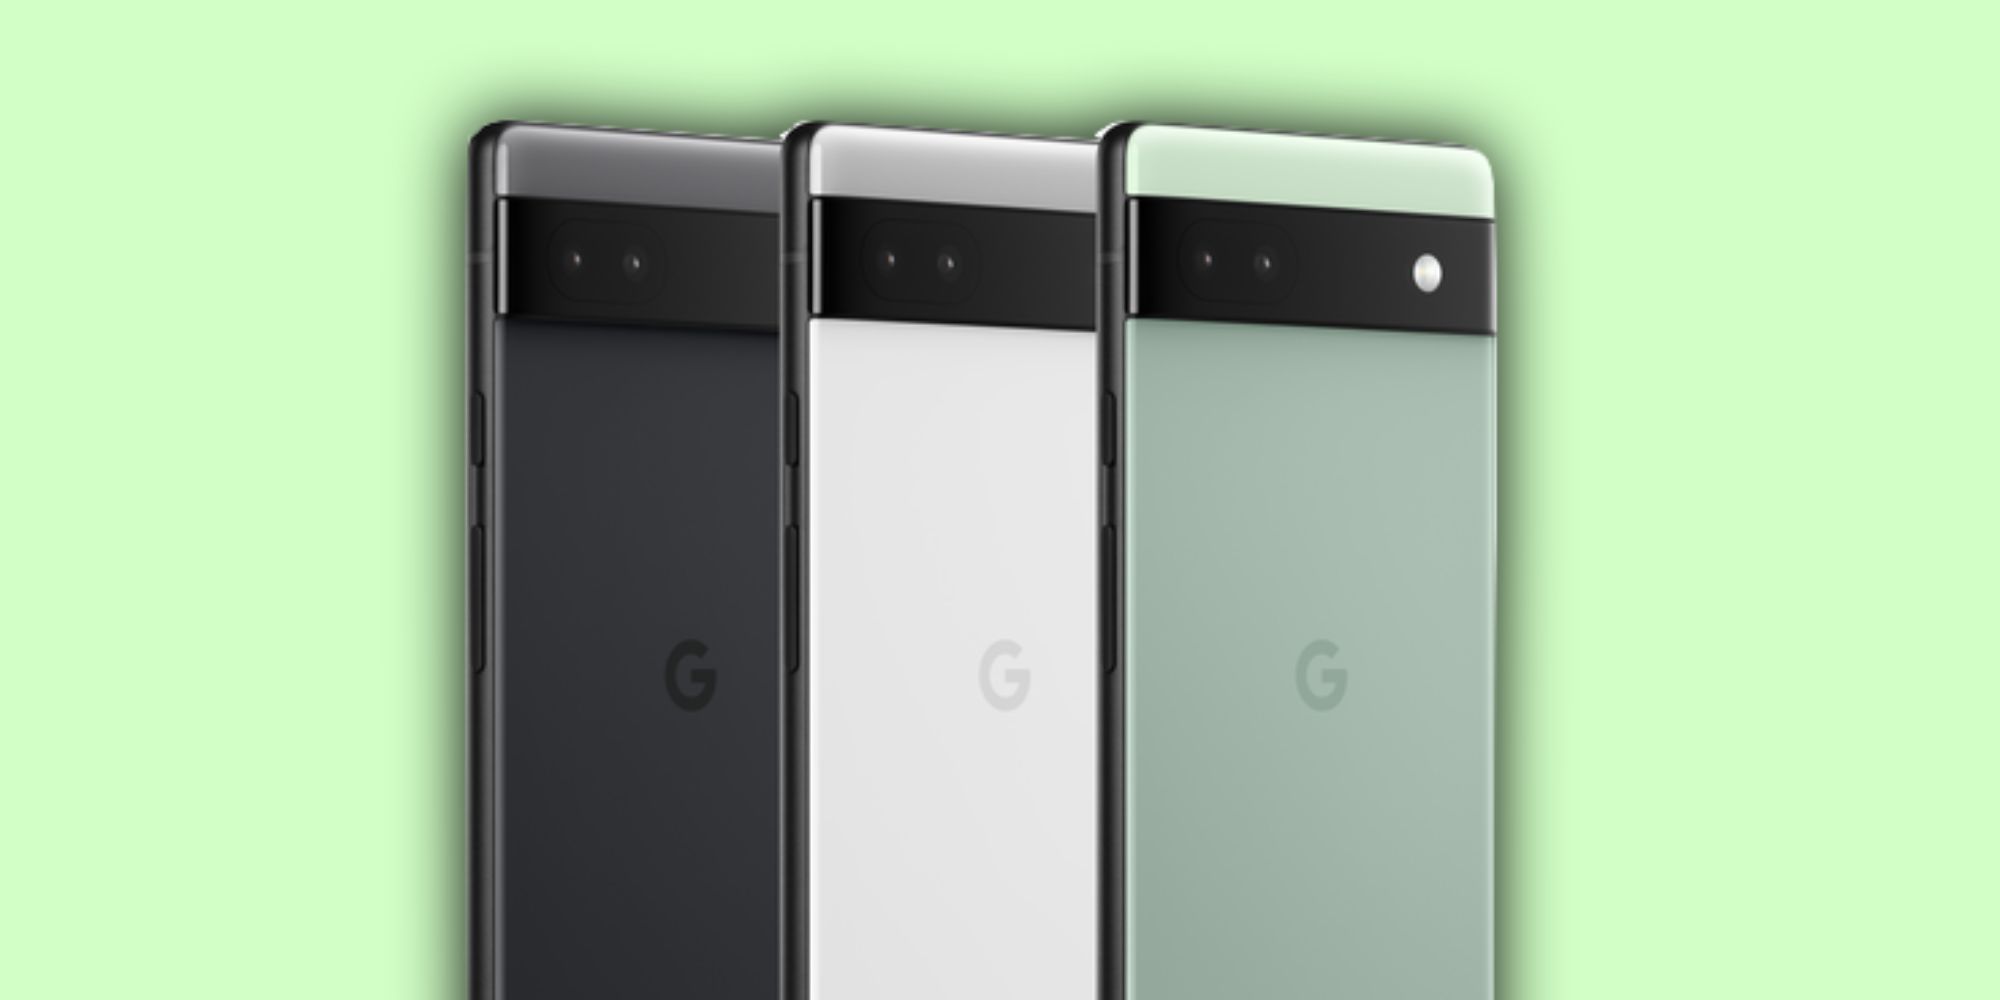 All of the Pixel 6a colors